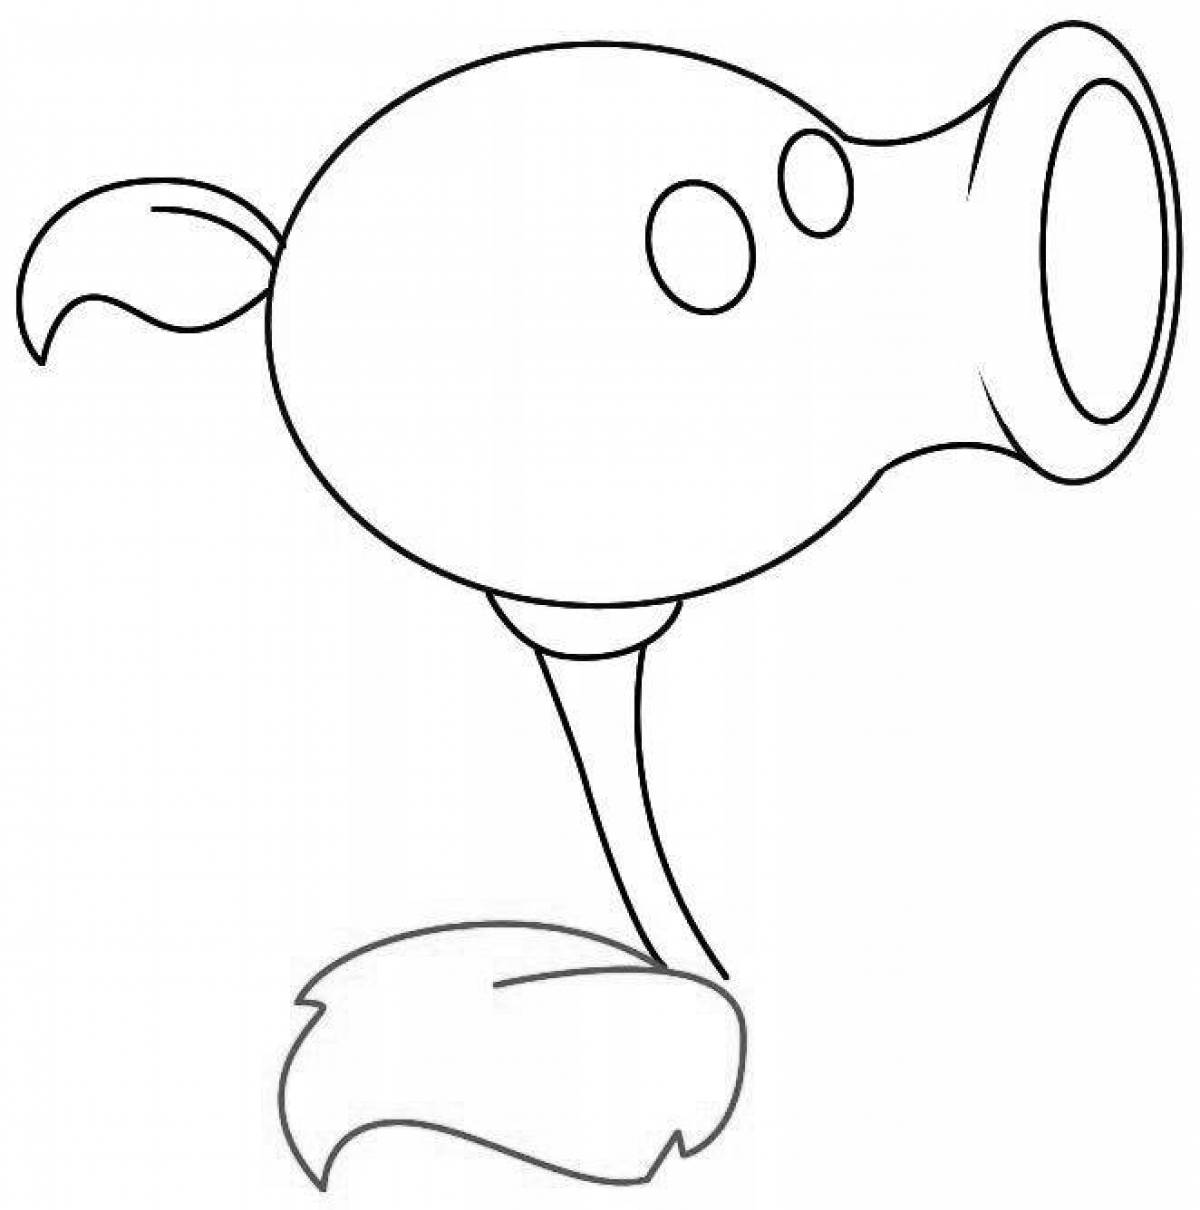 Coloring page cheerful pea shooter